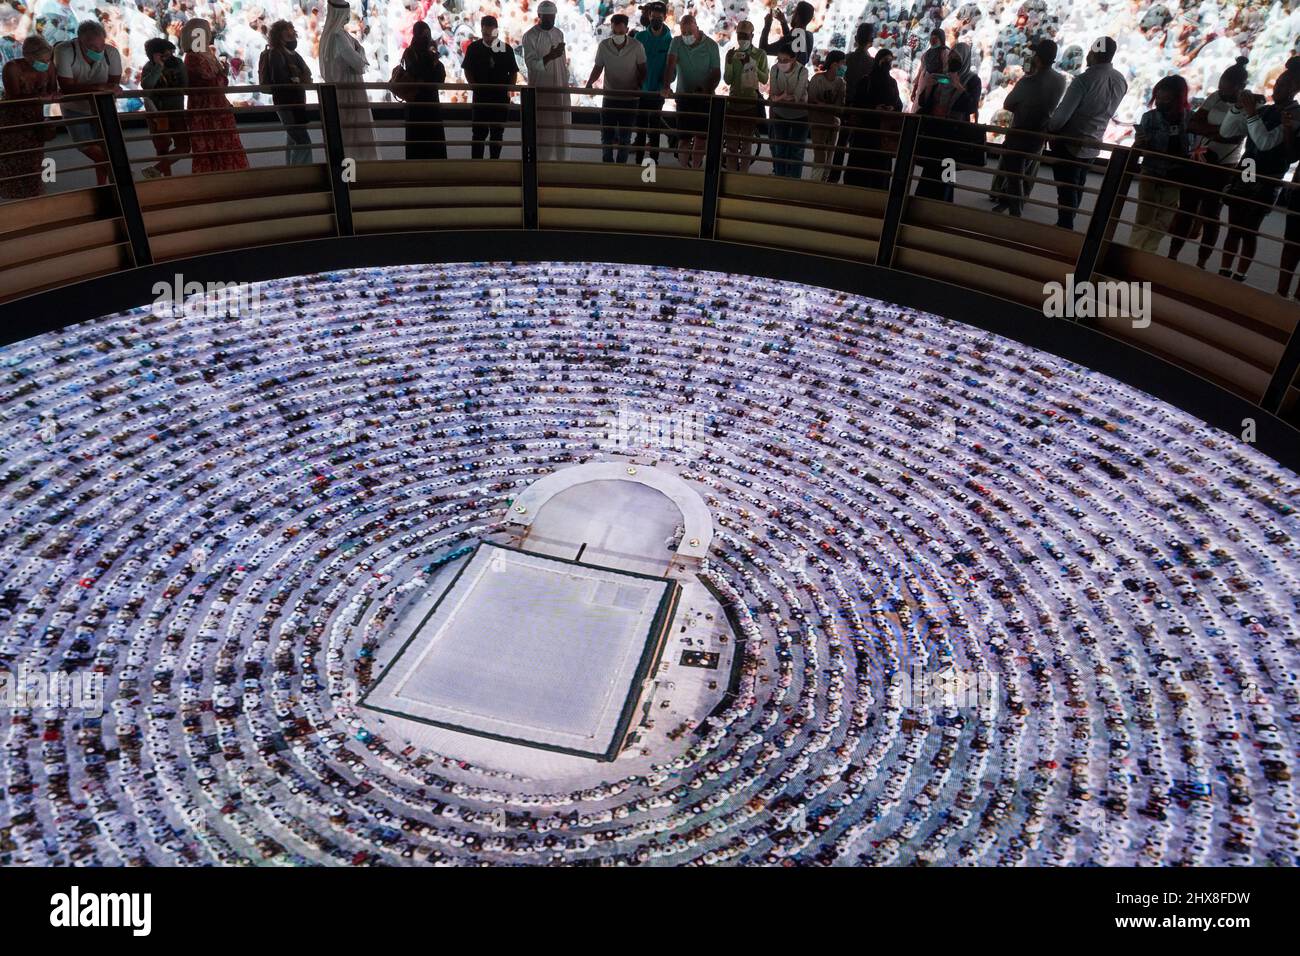 The Saudi Arabia pavilion at Dubai Expo2020, showing the visitors in an immersive showing of drone footage from the country. Stock Photo